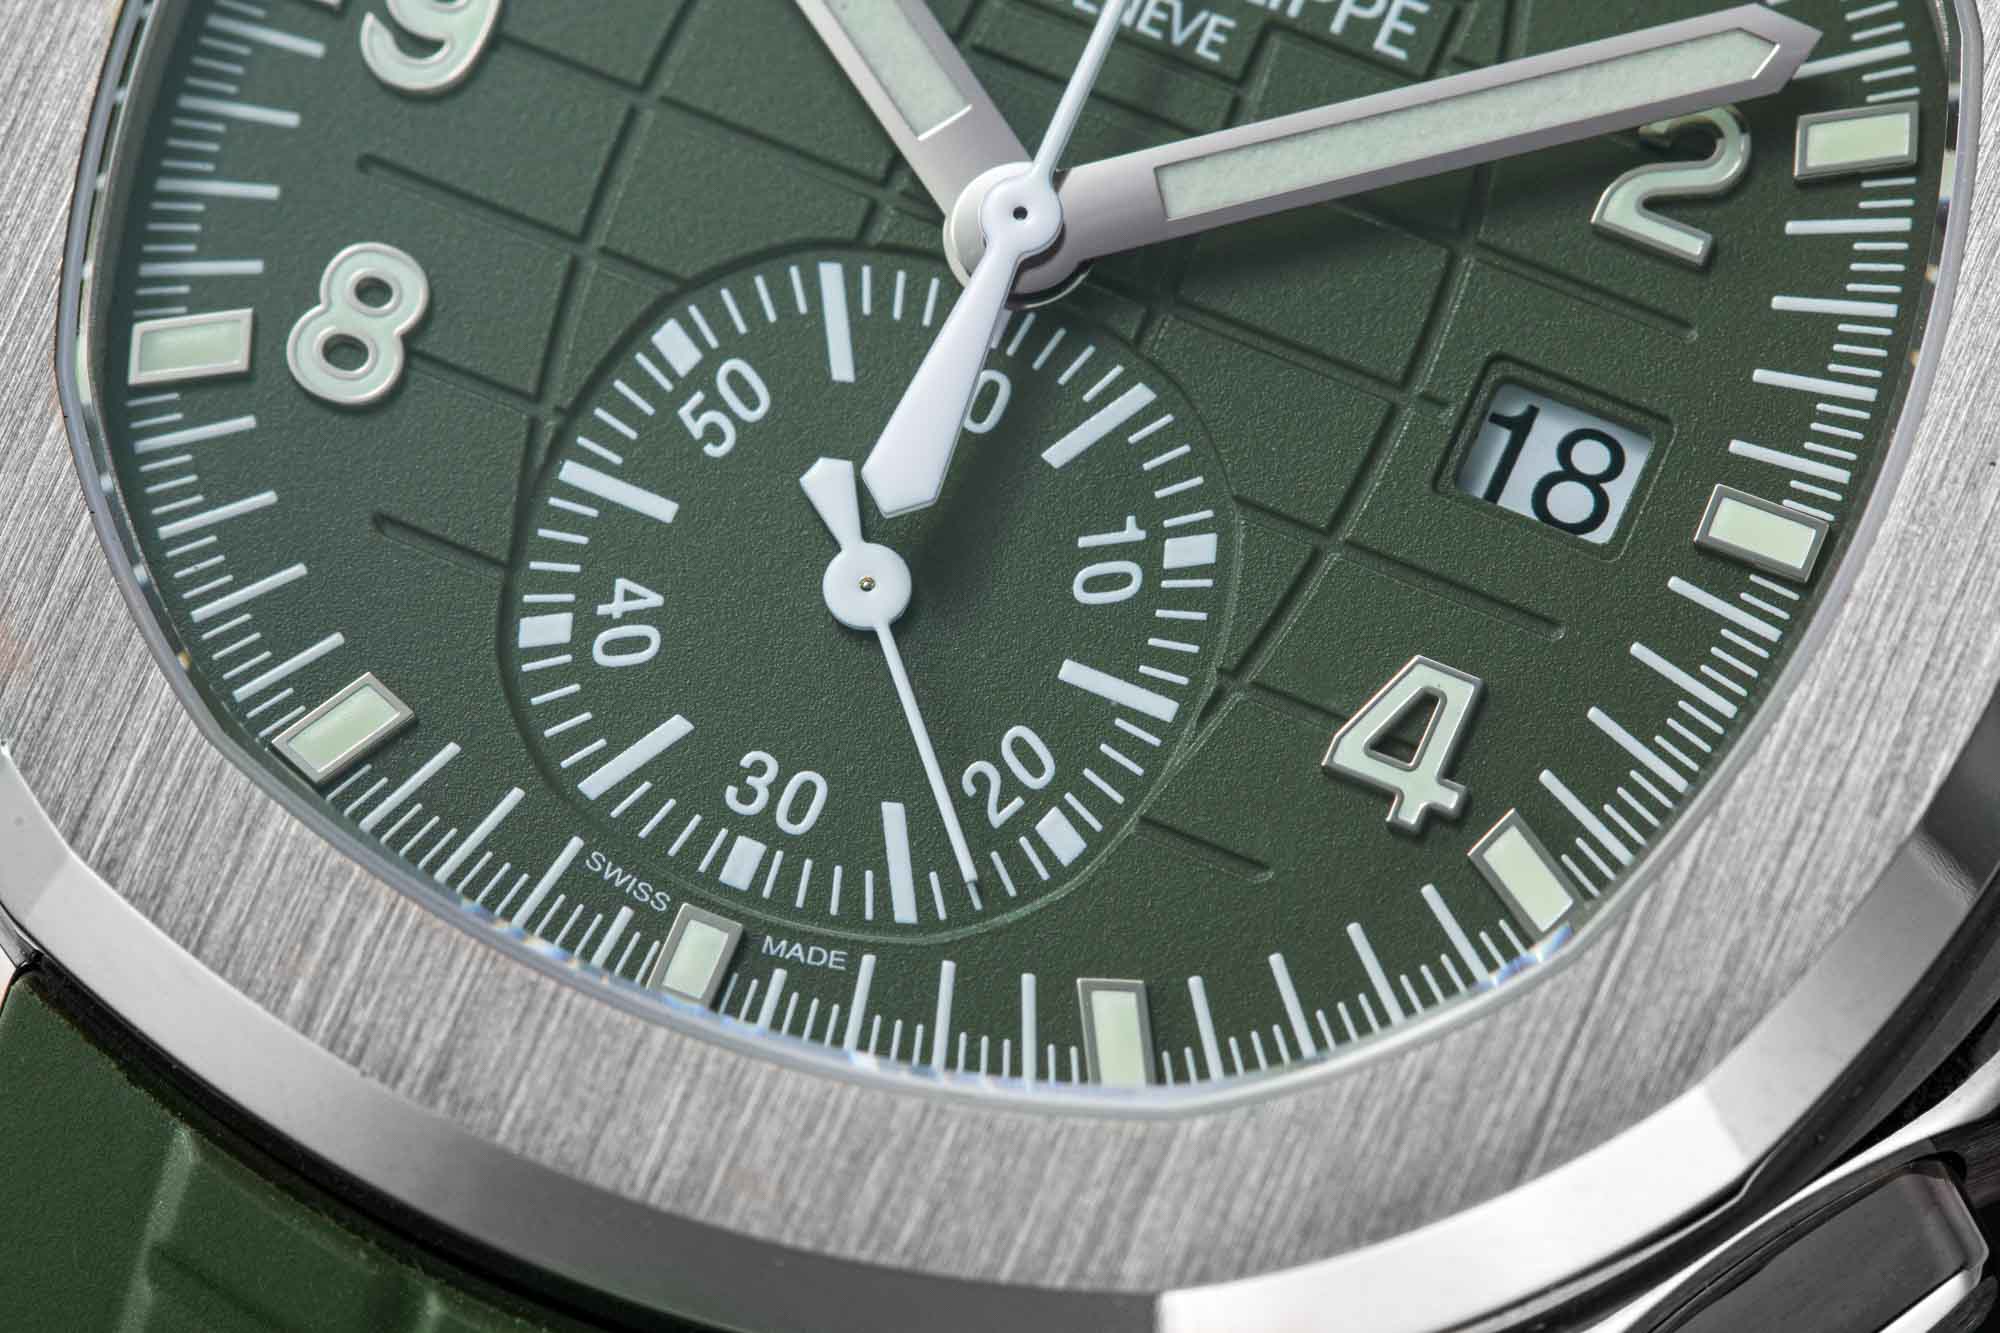 Patek Philippe Aquanaut Flyback Chronograph Ref. 5968G Is Enhanced By The Signature Aquanaut Pattern Embossing, Gold Applied Numerals With Luminescent Coating.